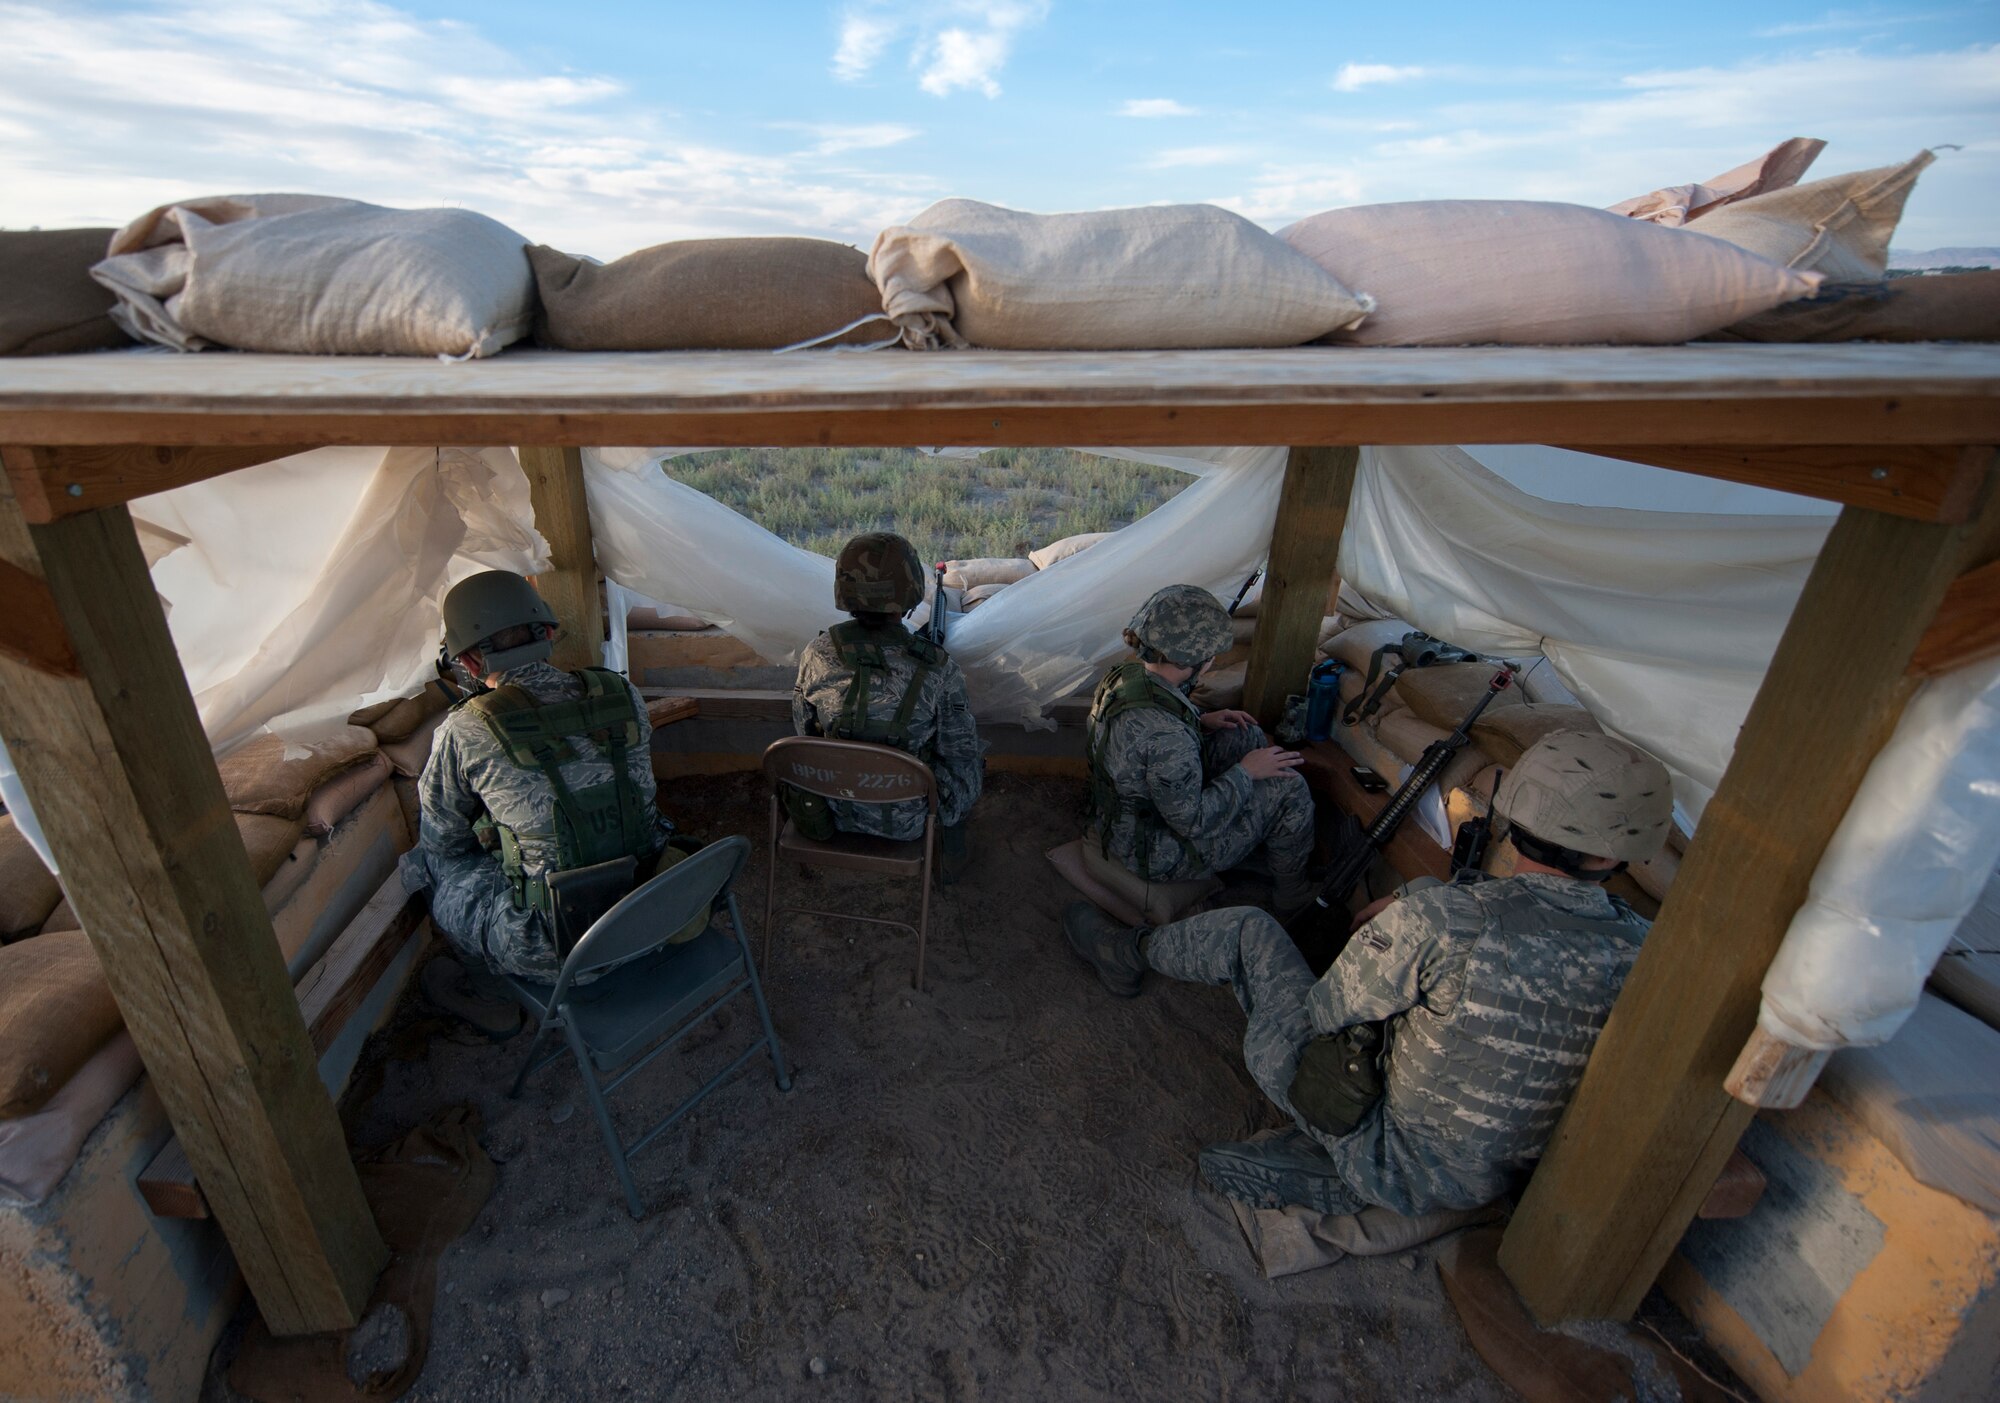 U.S. Air Force Airmen from the 726th Air Control Squadron observe their surroundings in a defensive fighting position Sept. 18, 2013, at Mountain Home Air Force Base, Idaho. Multiple DFPs were set-up around the mobile operating air base to ensure safety of all personnel on the MOAB. When enemy personnel try to infiltrate the MOAB, Airmen take the appropriate actions to protect the base. (U.S. Air Force photo by Airman 1st Class Brittany A. Chase/Released)